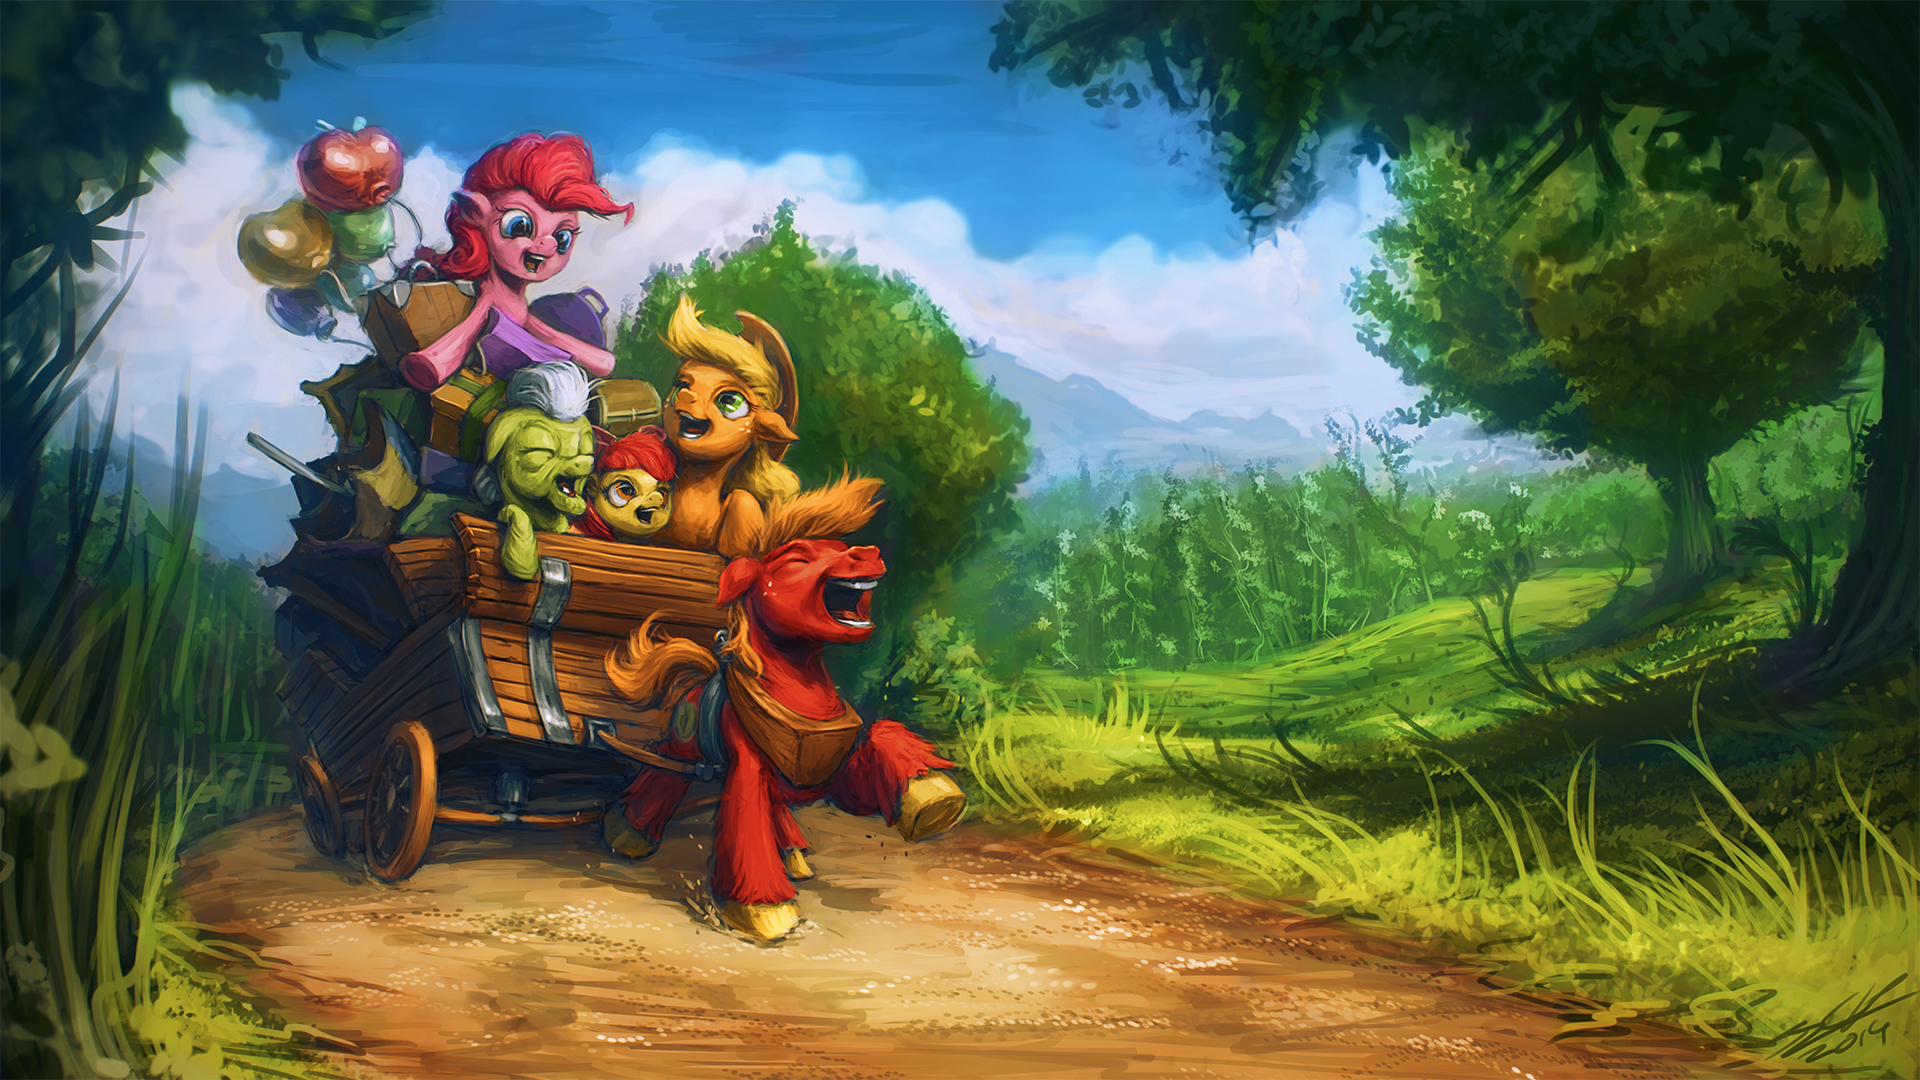 To the Apple Core by AssasinMonkey